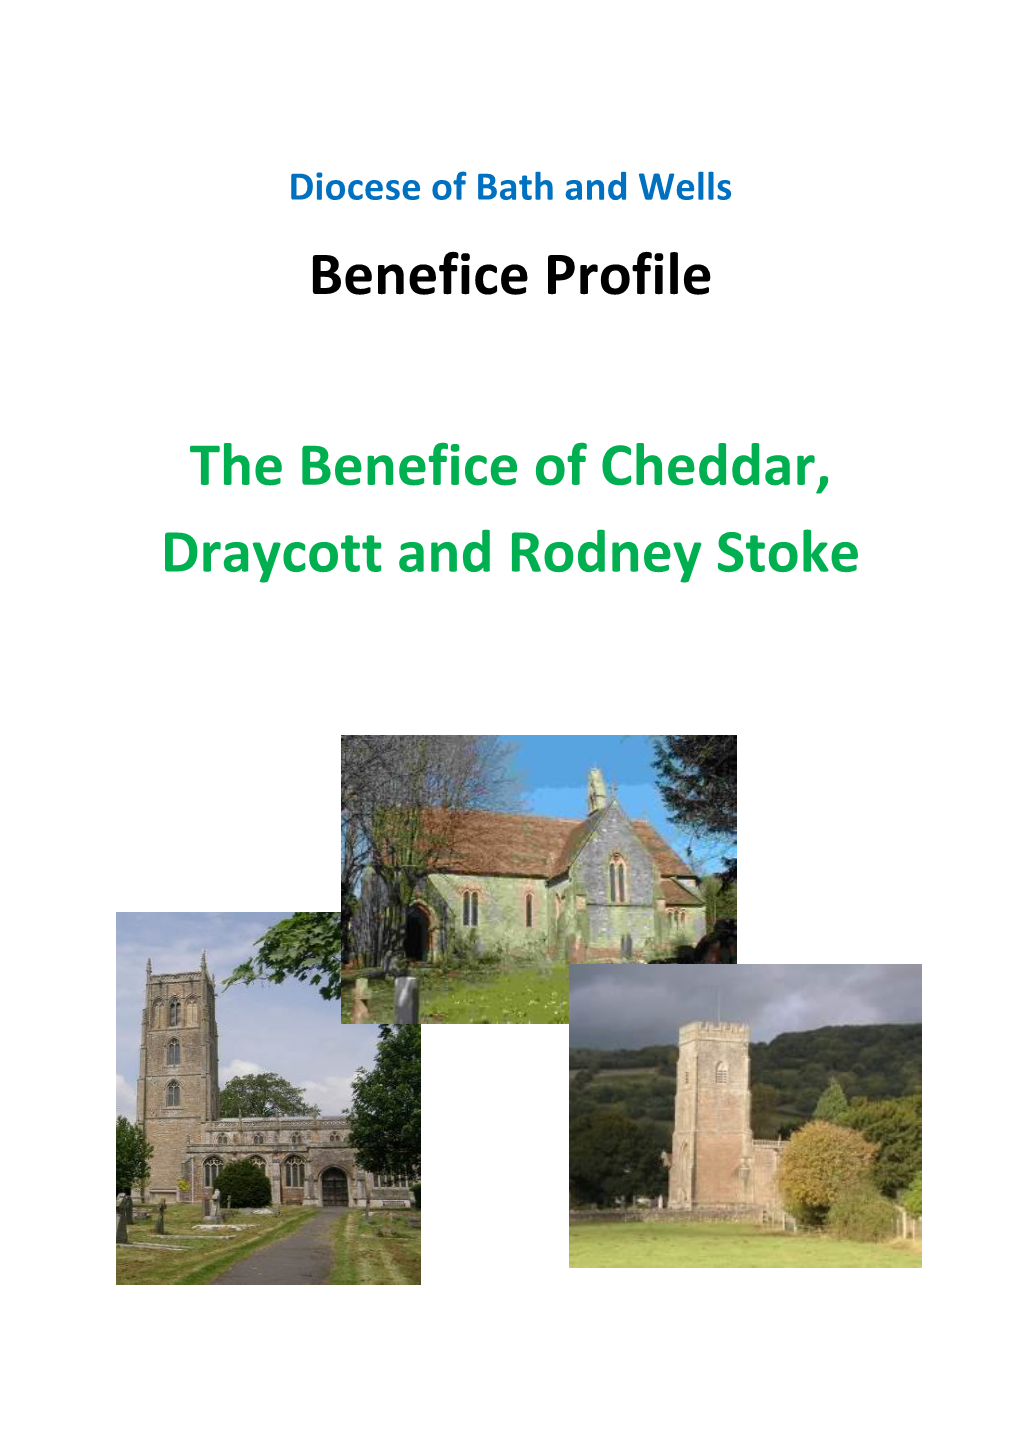 The Benefice of Cheddar, Draycott and Rodney Stoke